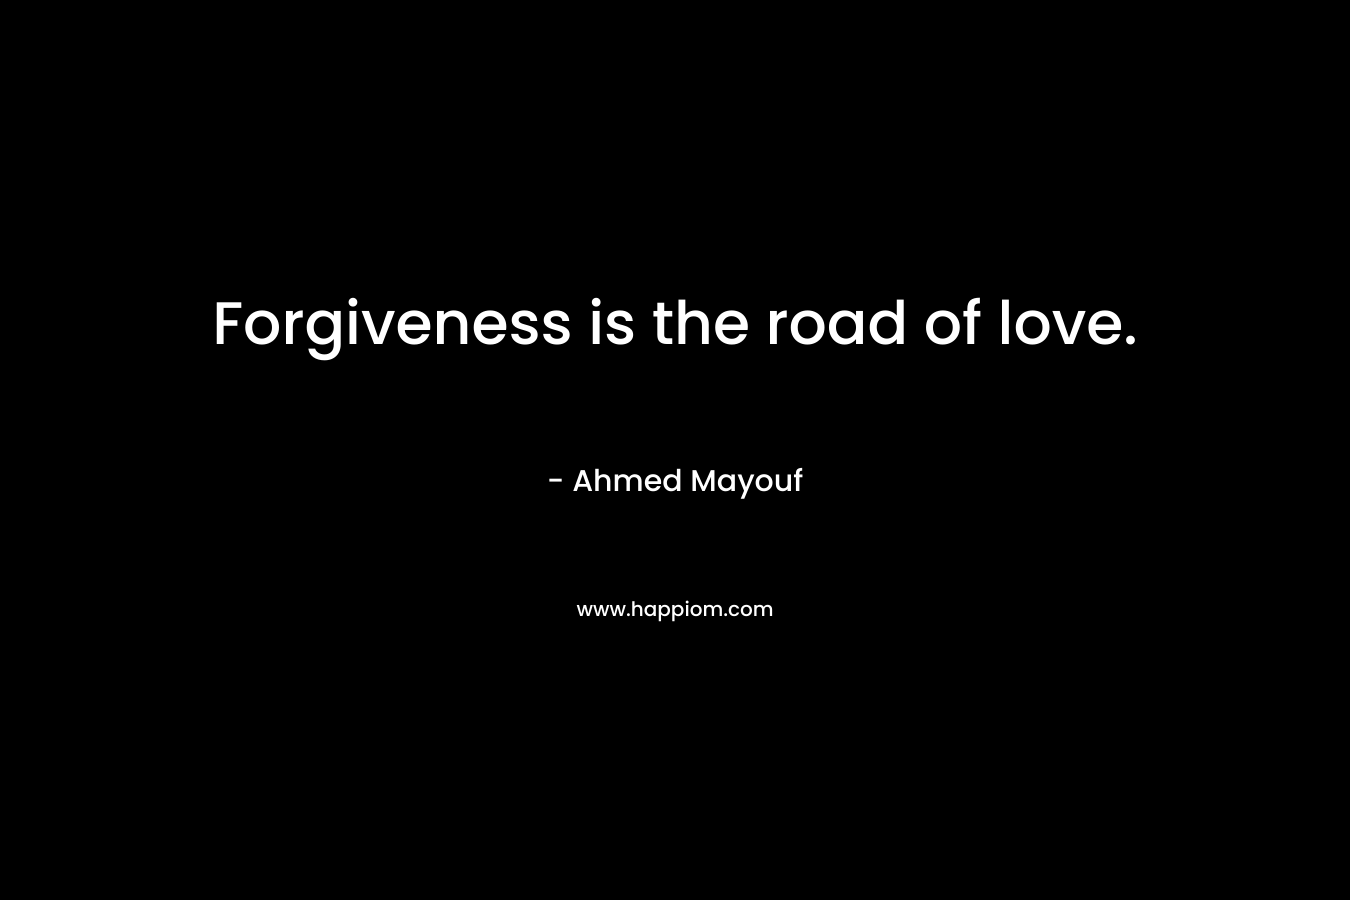 Forgiveness is the road of love.